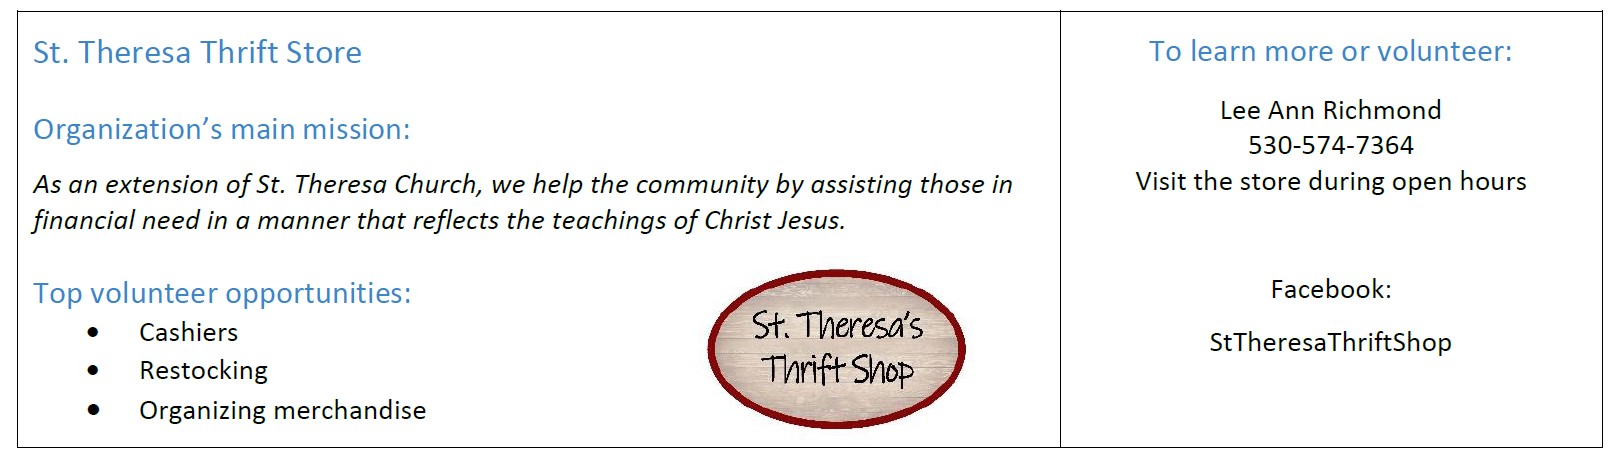 Volunteer opportunities at St. Theresa's Thrift Shop